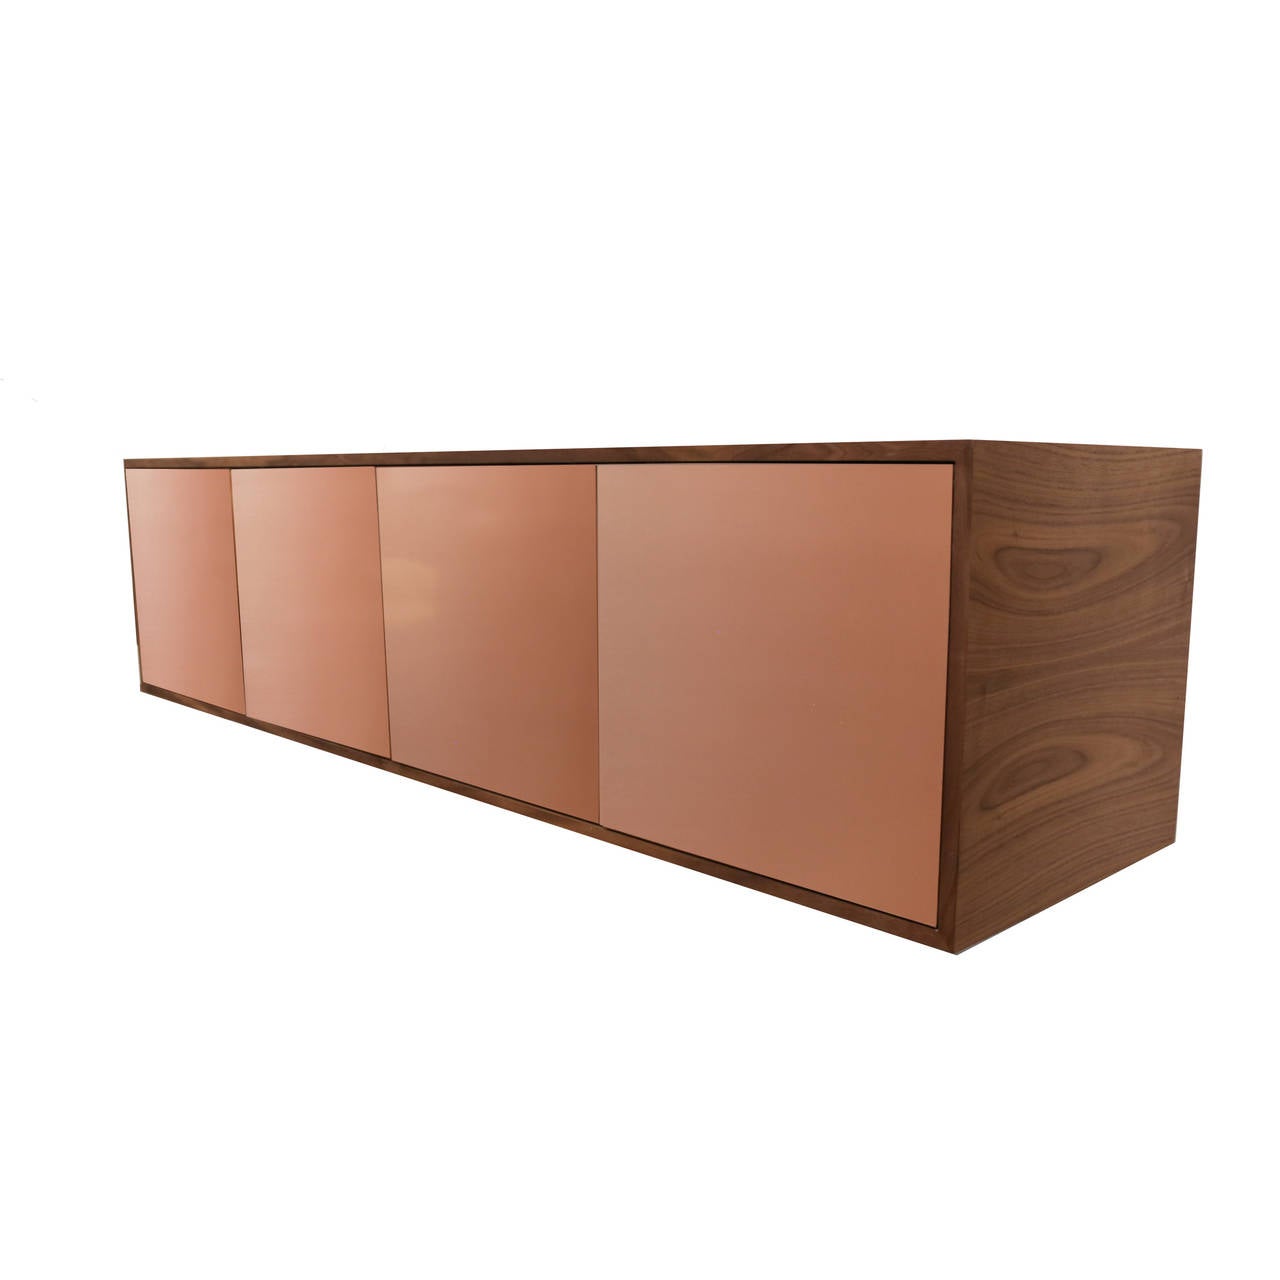 A simple yet impactful floating credenza by Thomas Hayes Studio made from solid Walnut in Pure Oil finish and four stunning Copper doors. The interior features eight individual shelf compartments, which can be customized to suit your needs.

This